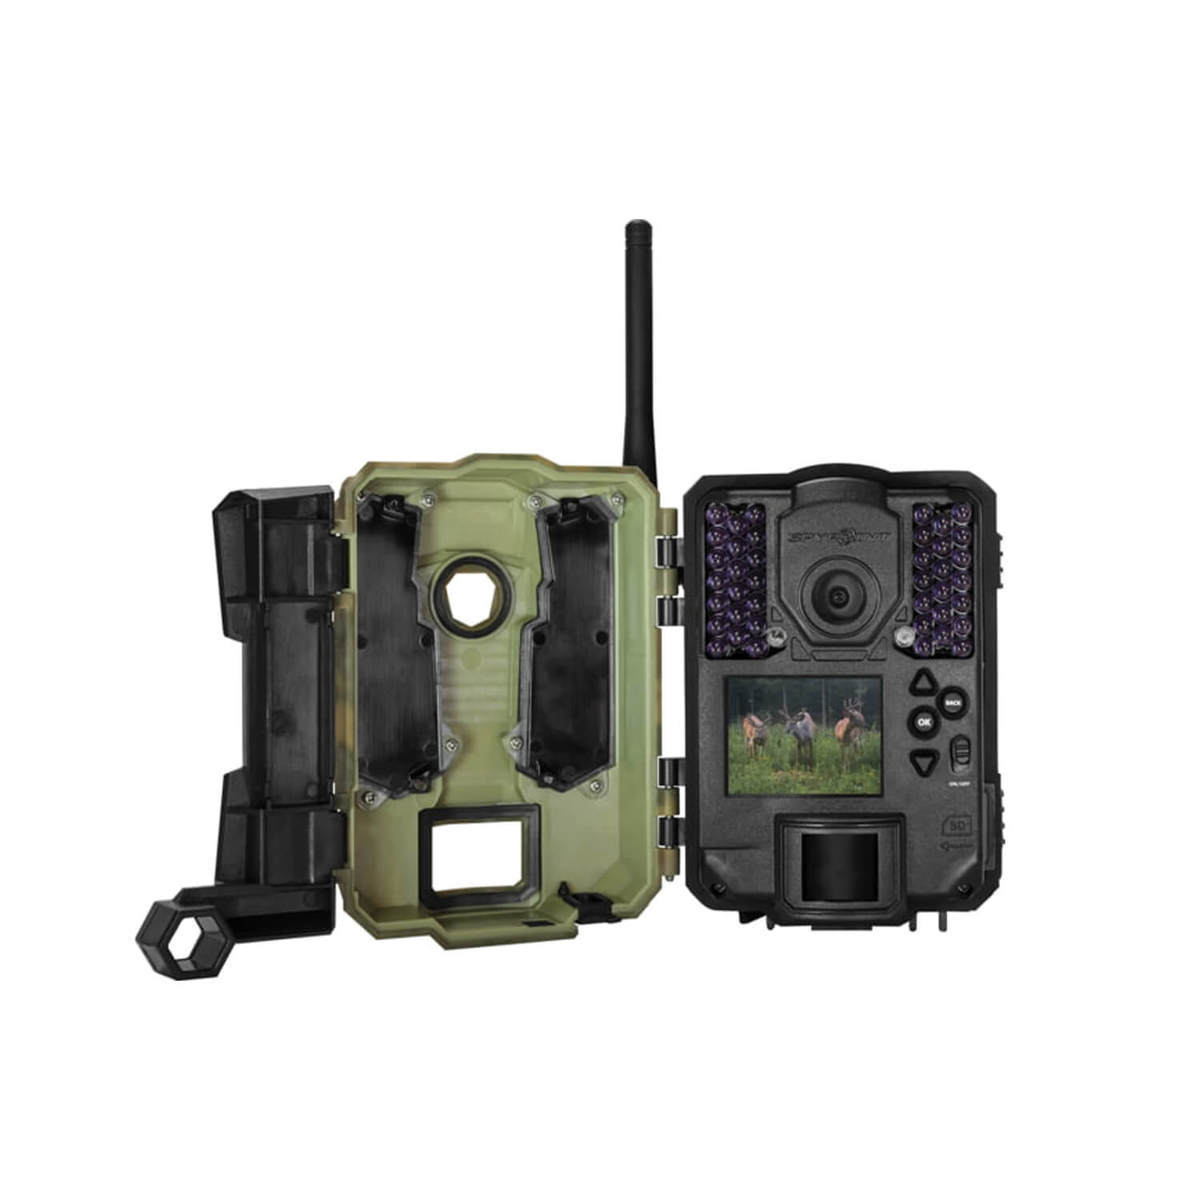 Spypoint Link-Dark Cellular Nationwide Trail Camera - Camo - Camouflage